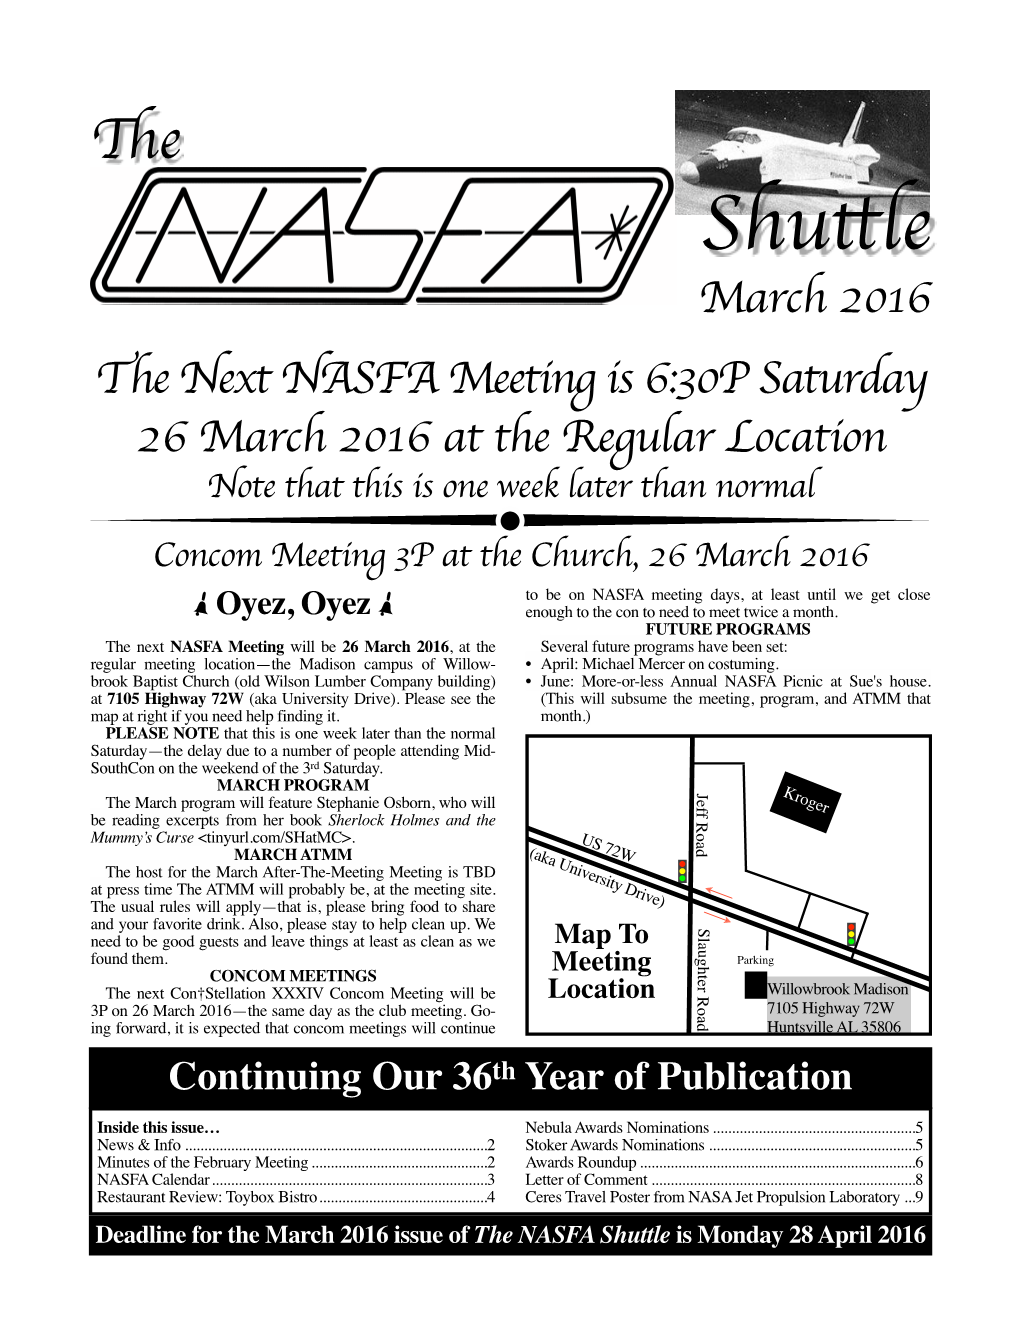 March 2016 NASFA Shuttle.Pages